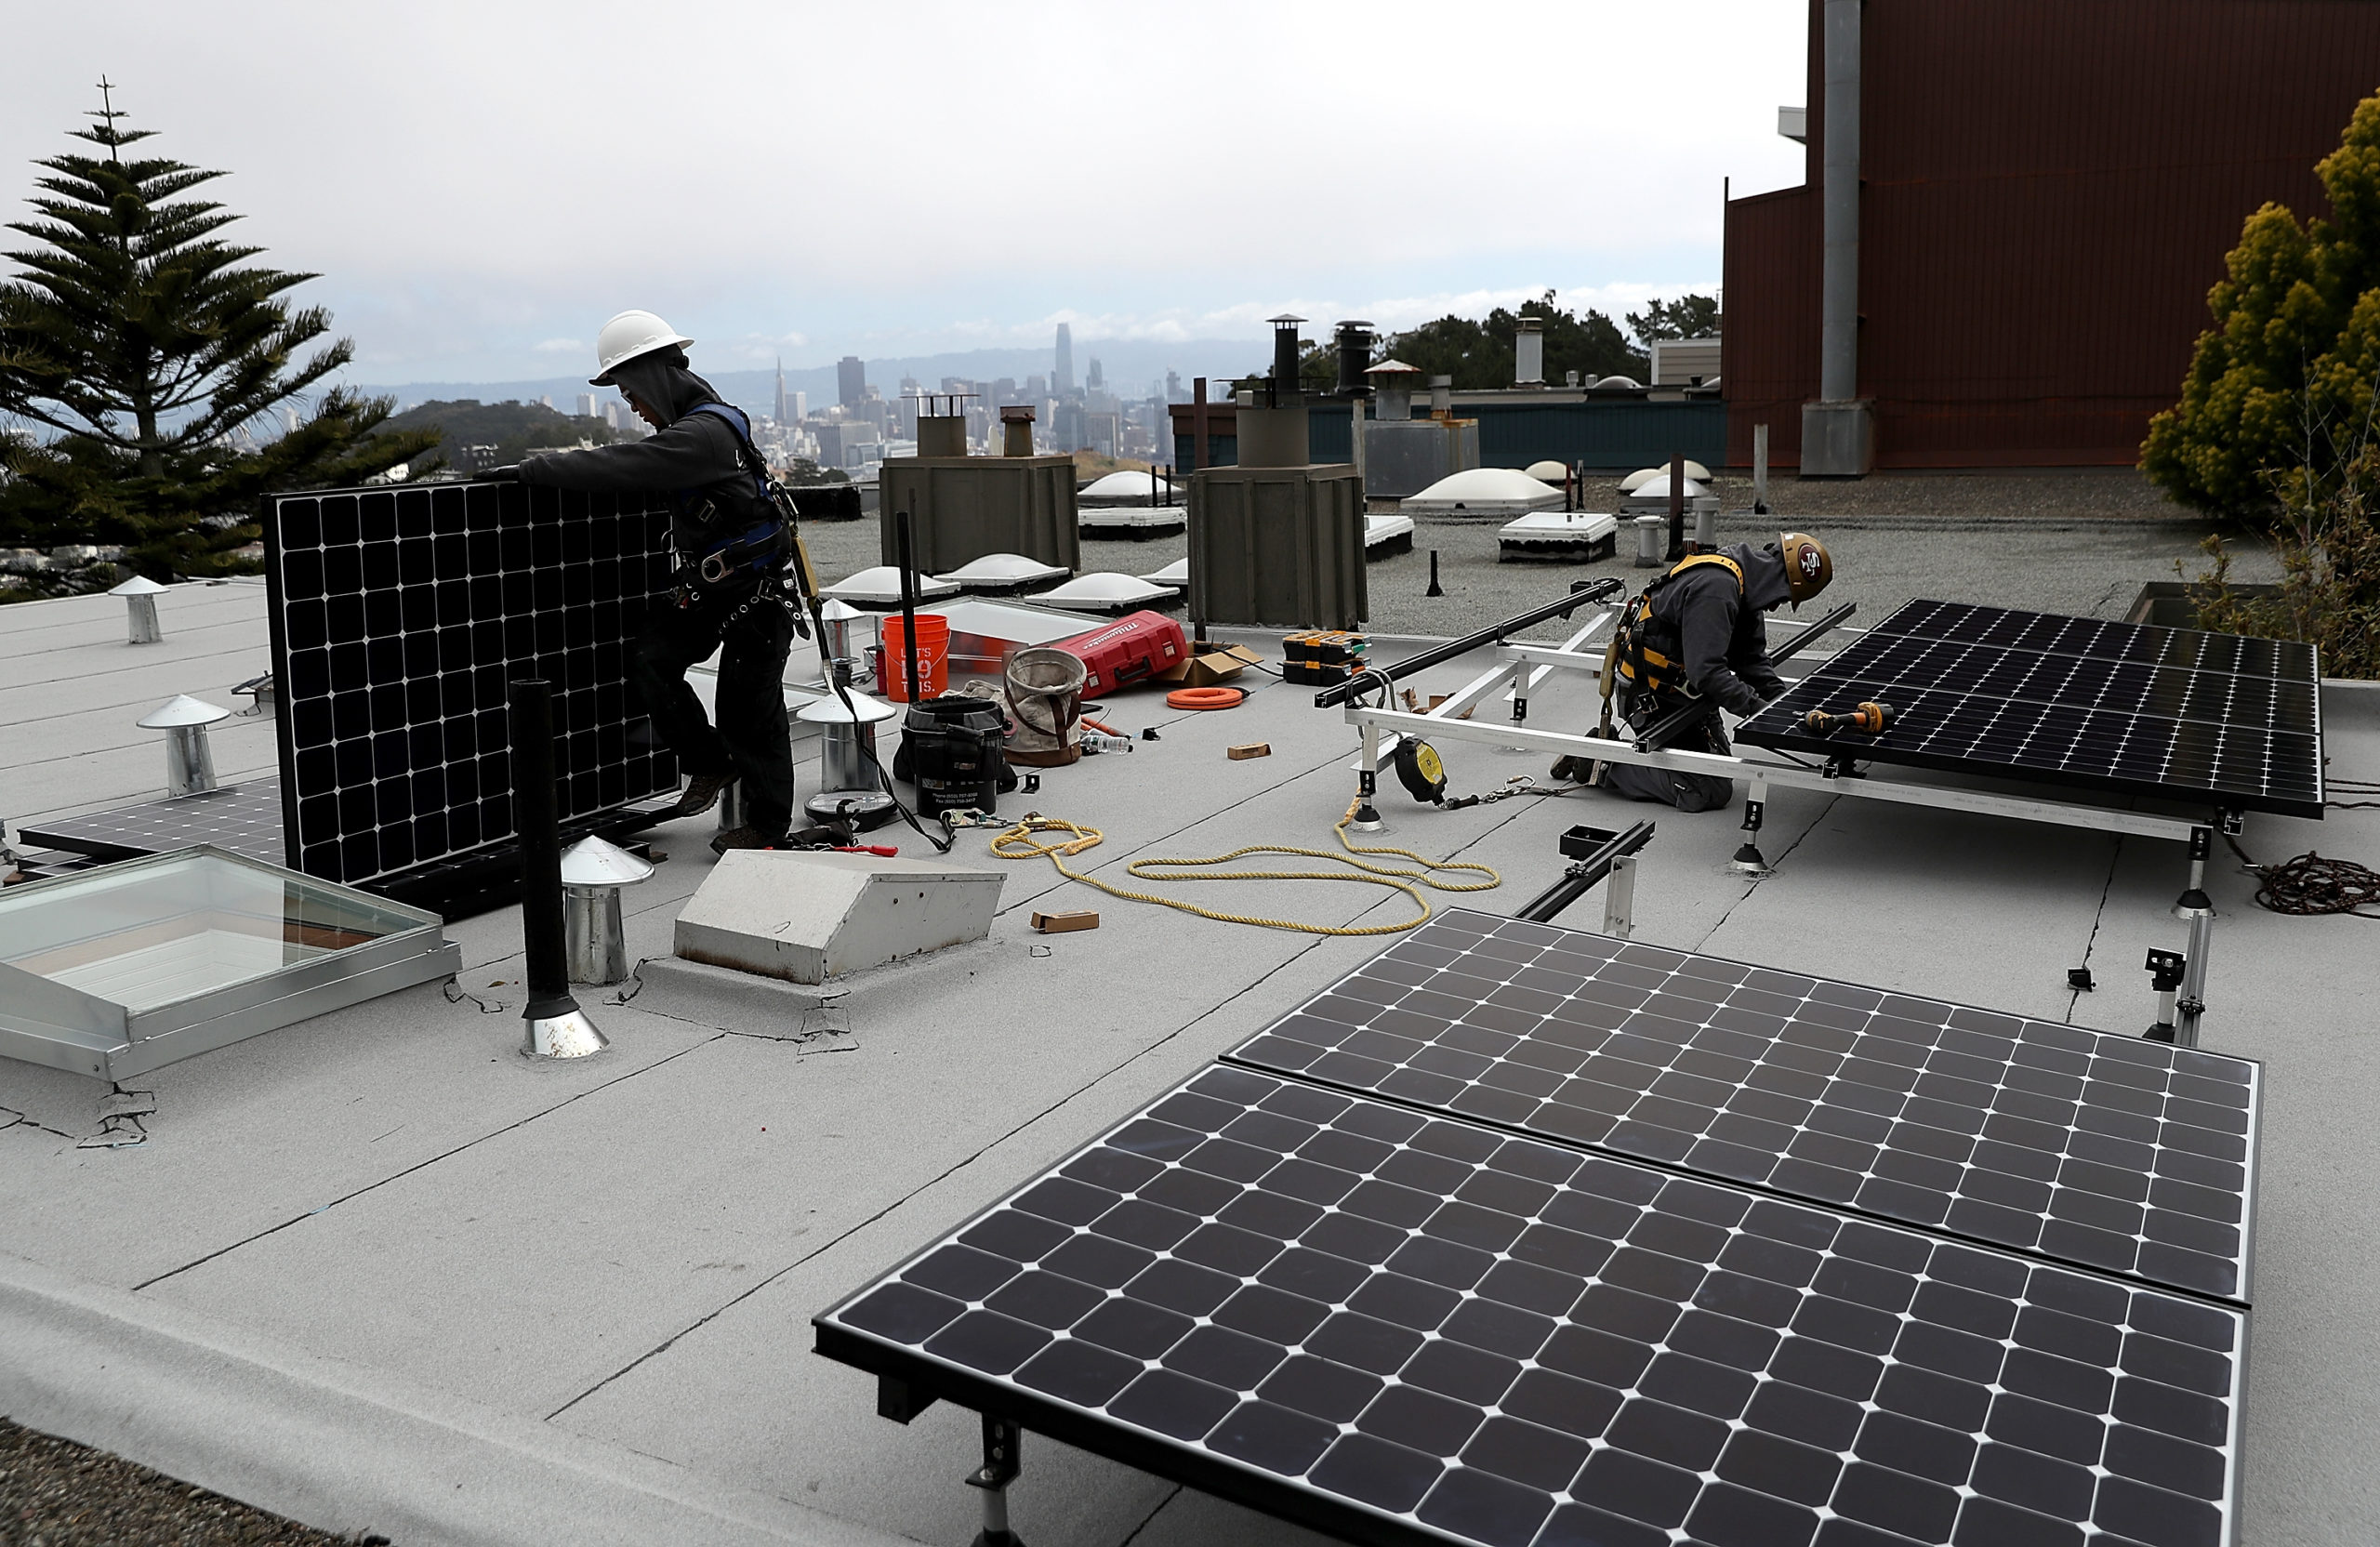 SAN FRANCISCO, CA - MAY 09: Luminalt solar installers Pam Quan (L) and Walter Morales (R) install solar panels on the roof of a home on May 9, 2018 in San Francisco, California. The California Energy Commission is set to vote on proposed legislation that would require all new homes in the state of California to have solor panels. If passed, the new mandate would require the panels on new homes up to three stories tall and is estimated to cost nearly $10K per home. (Photo by Justin Sullivan/Getty Images)